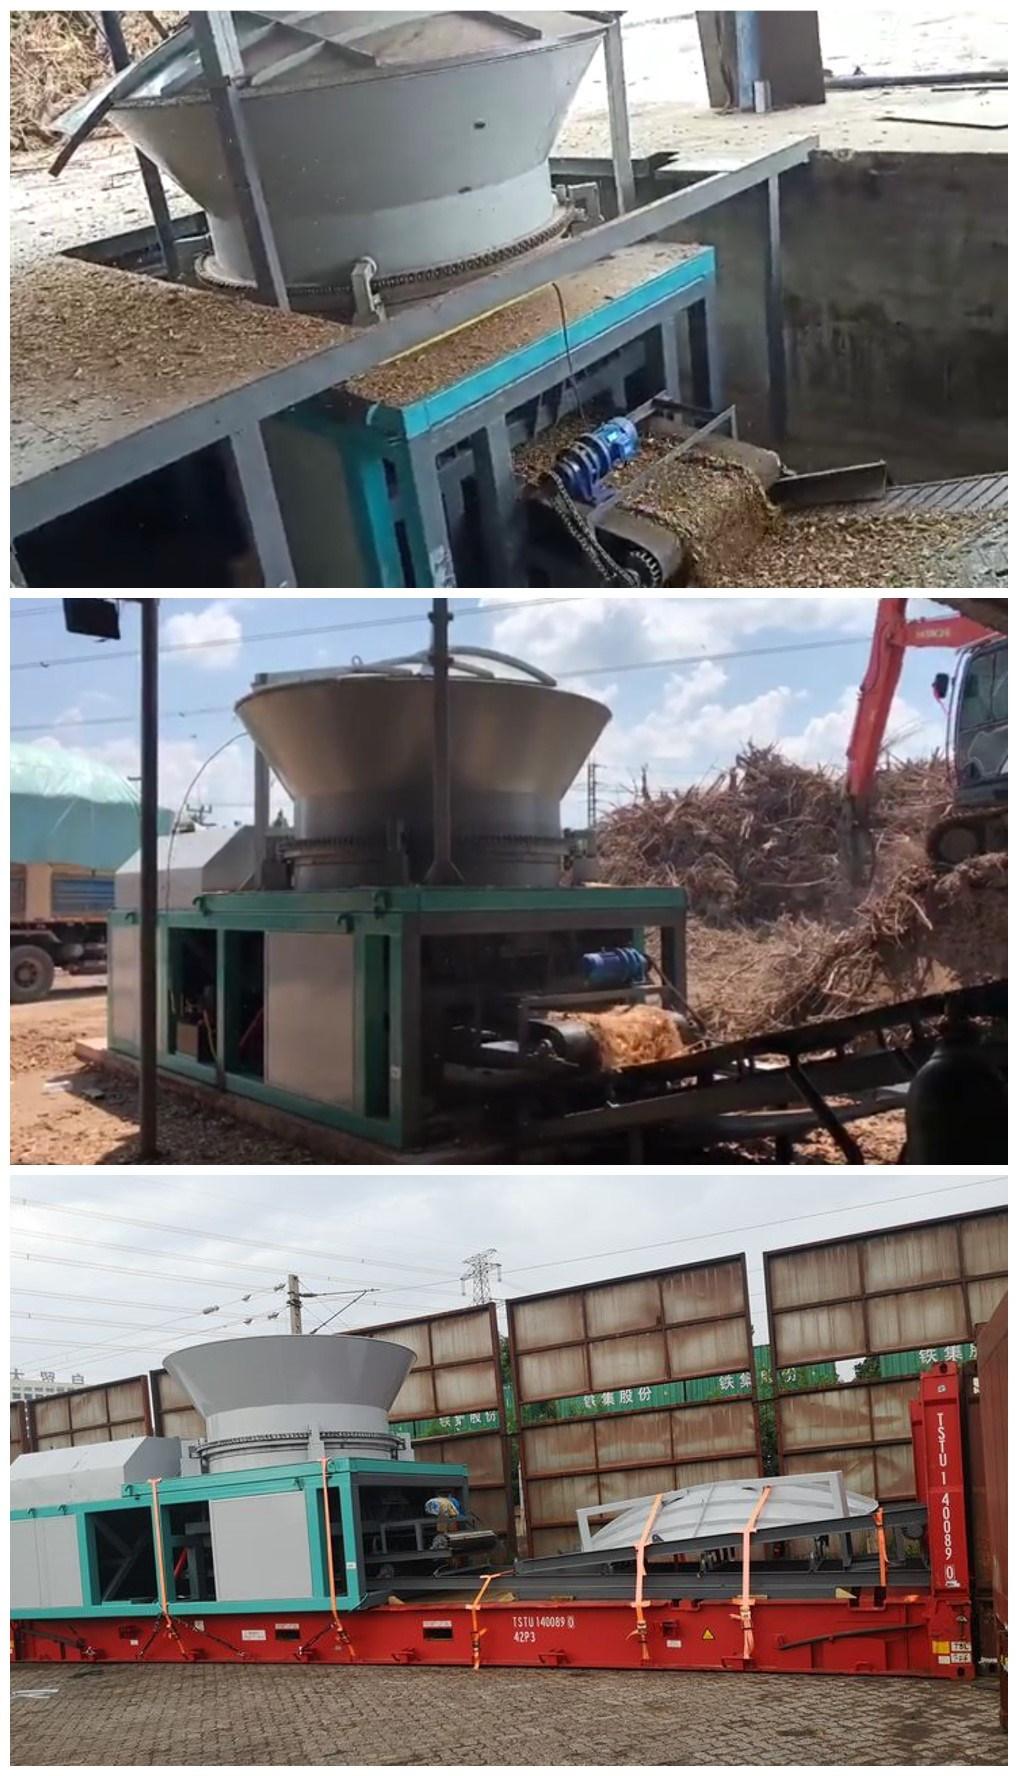 Large Crushing Crusher Comercial Disc Shredder Machine Wood Chipper for Sale